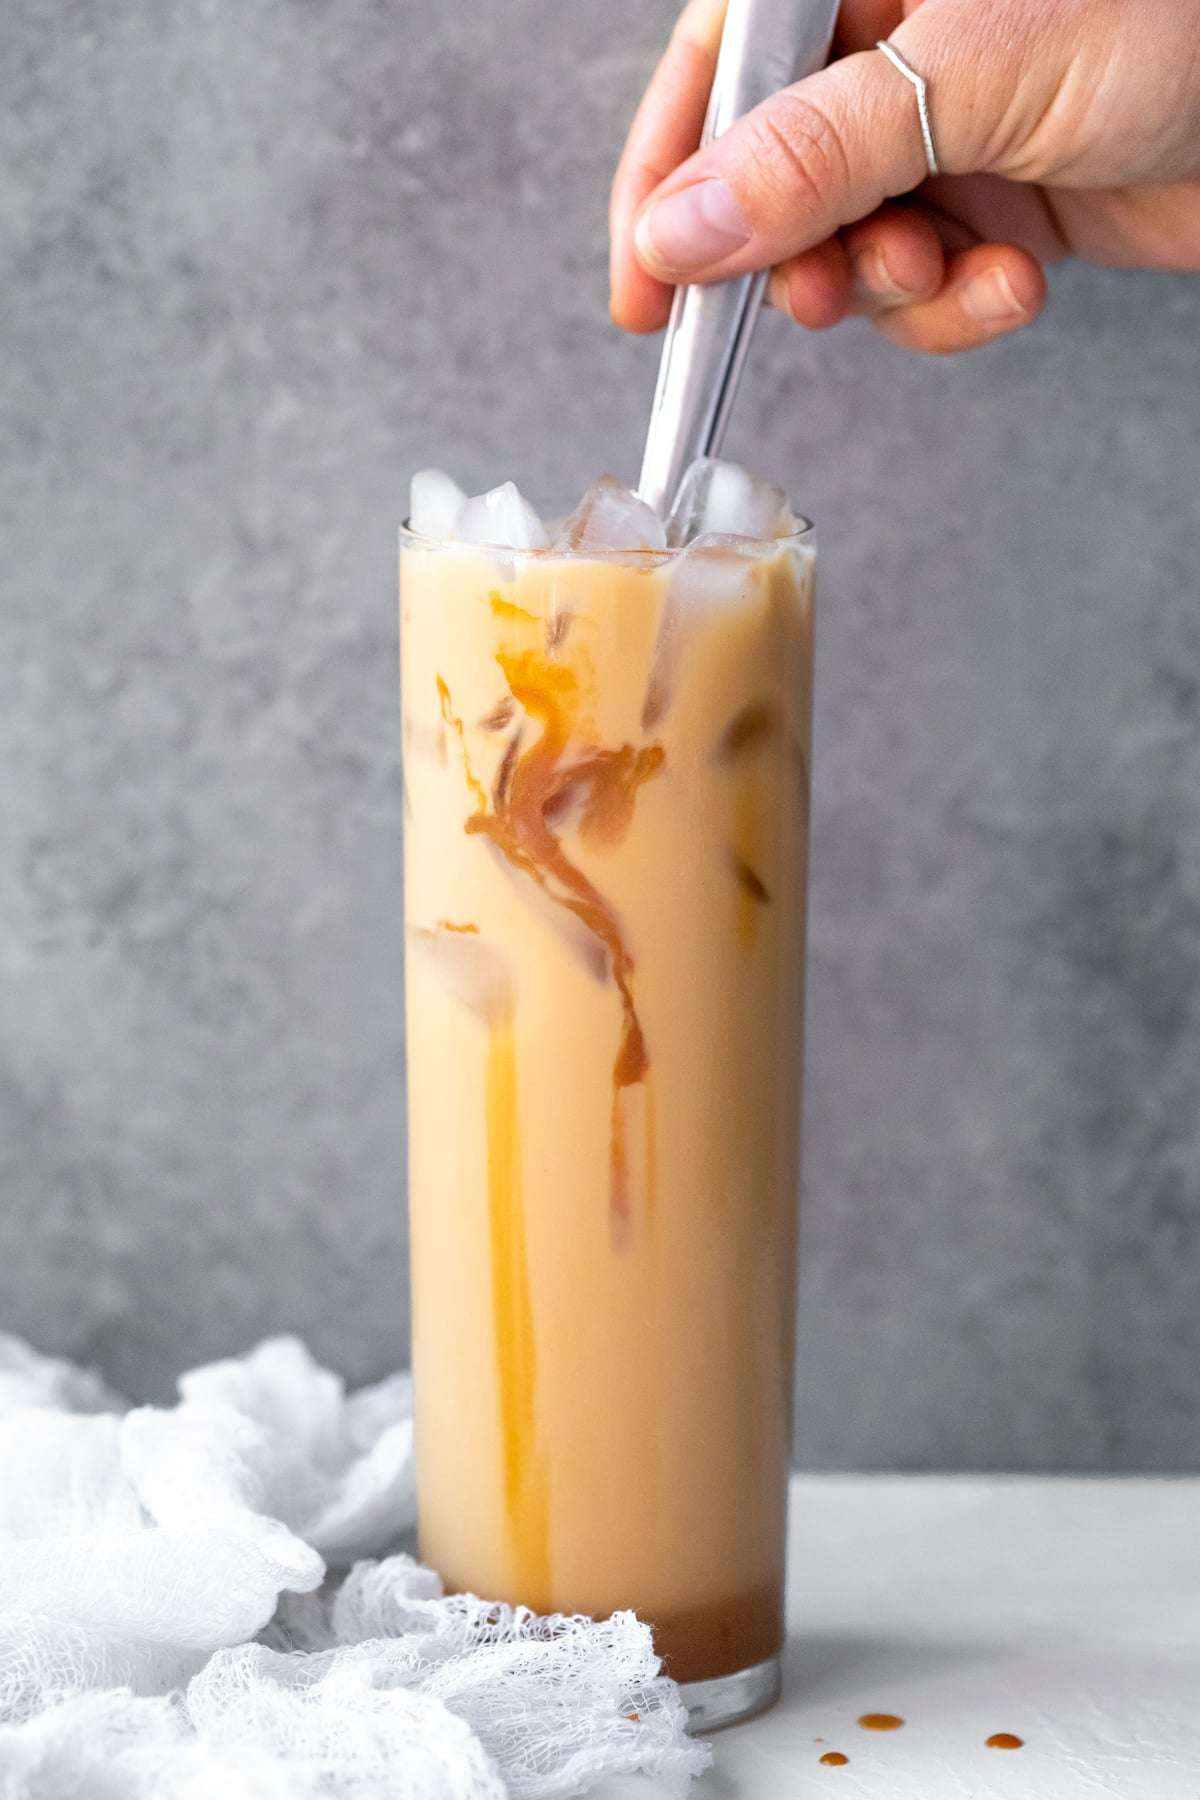 How To Make Mcdonald S Caramel Iced Coffee At Home